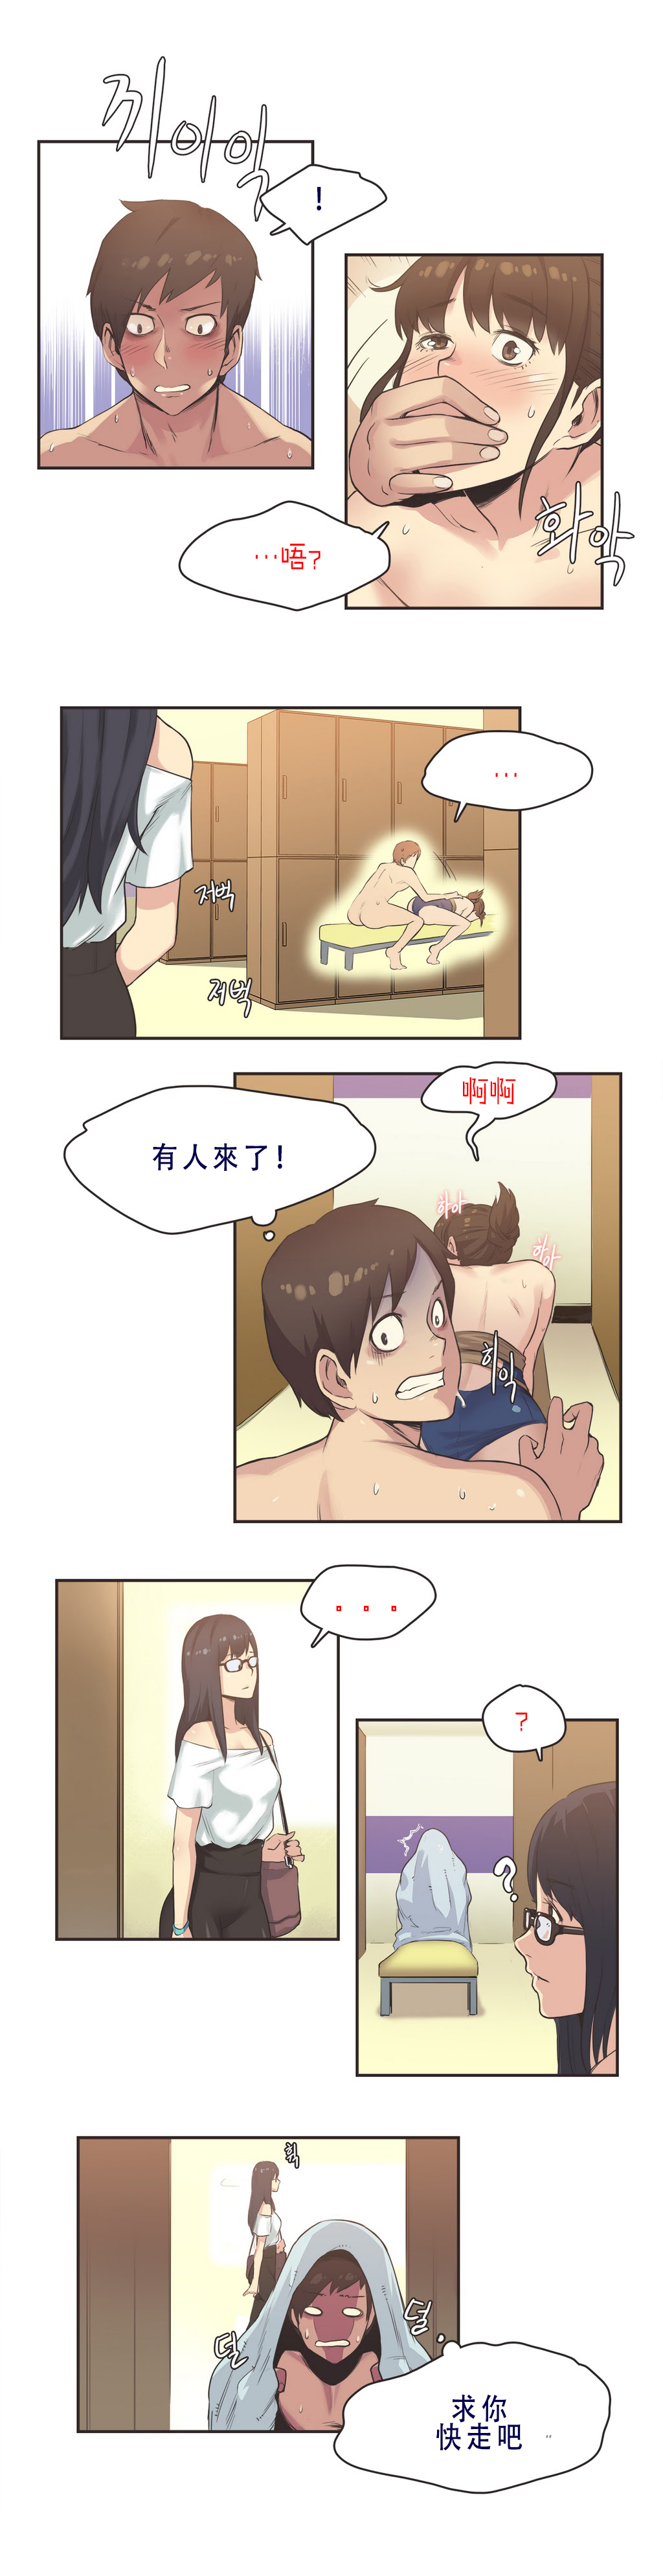 [Gamang] Sports Girl Ch.8 [Chinese] [高麗個人漢化] 